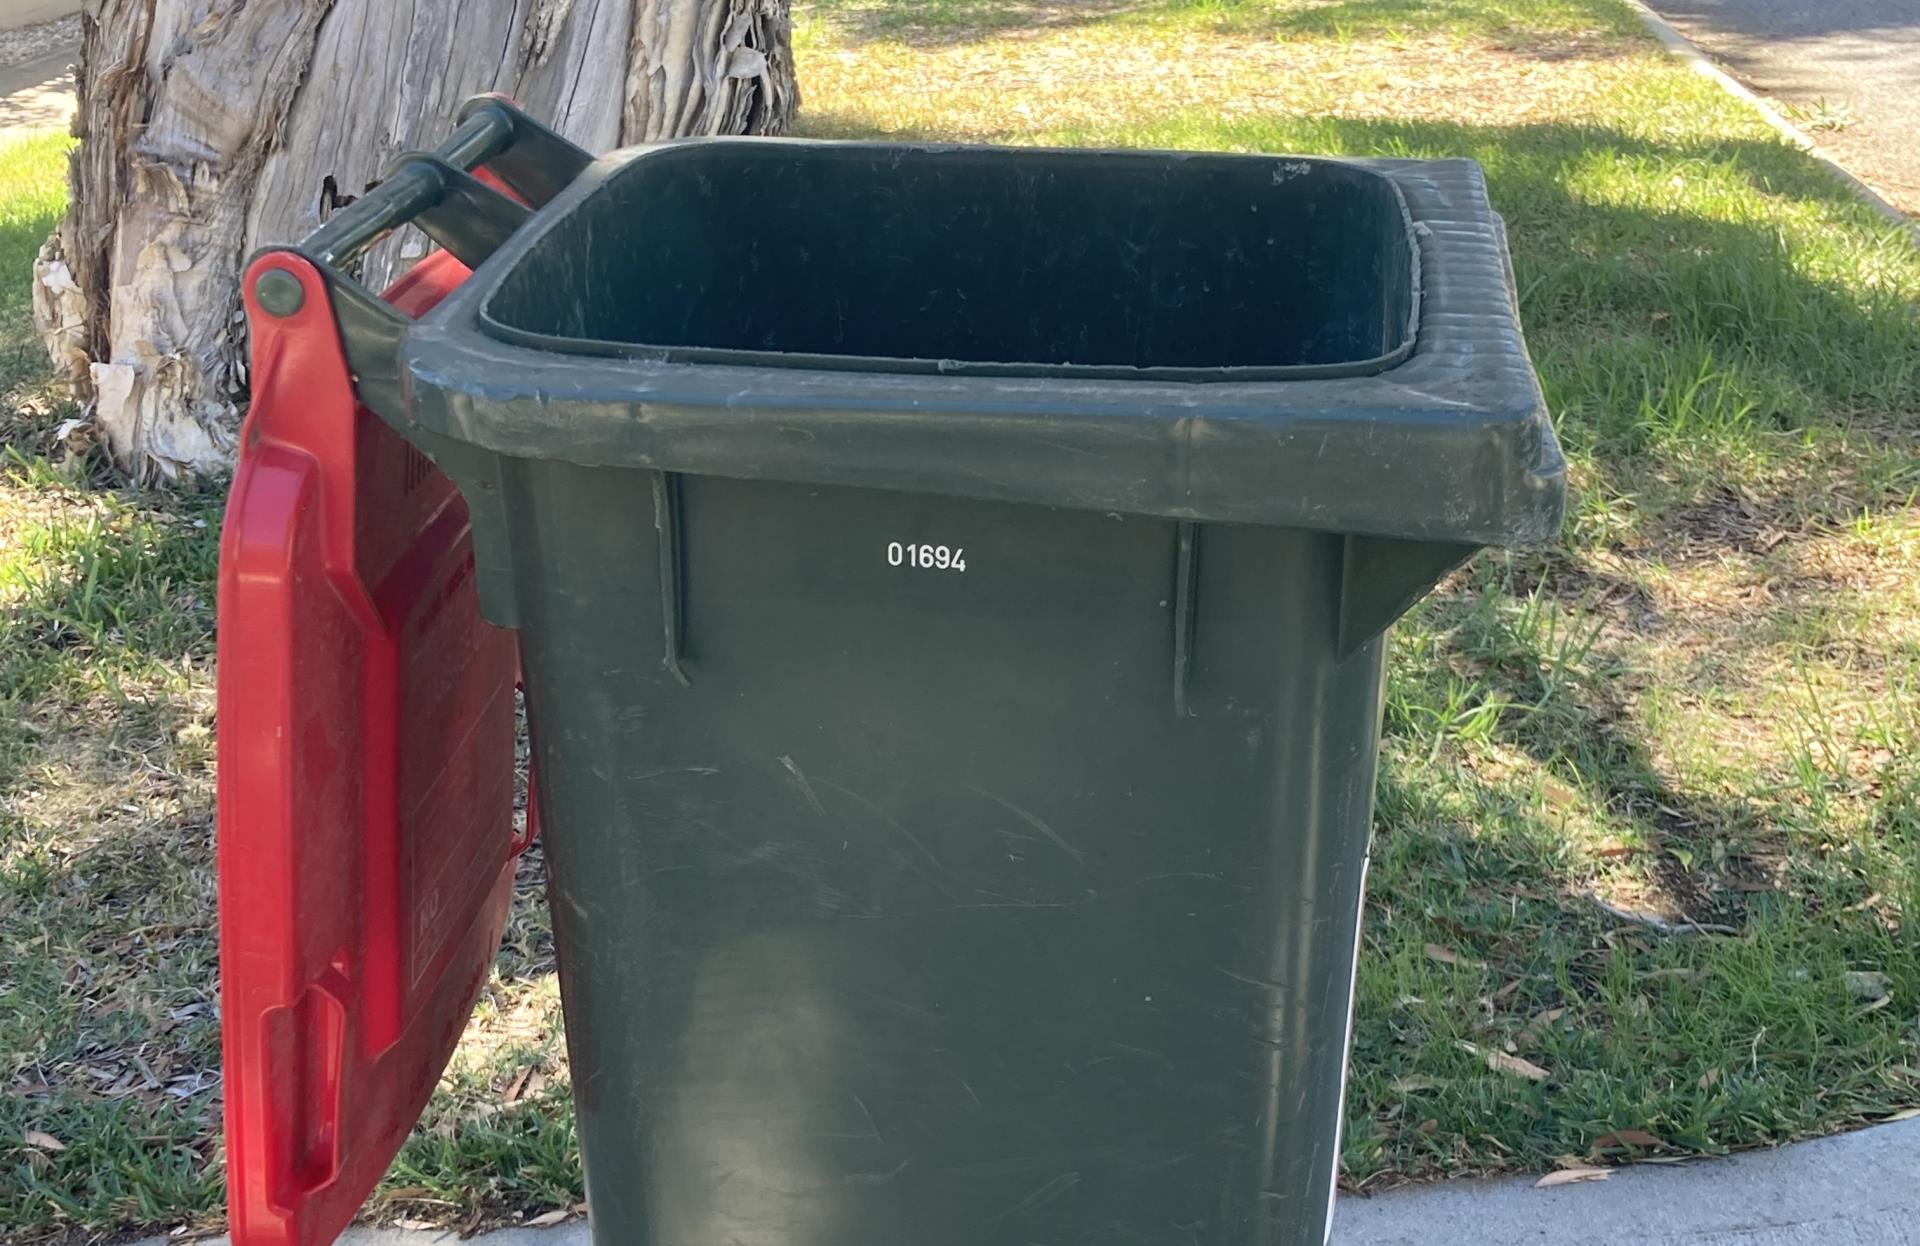 Request for Repair or Change to Bin Services Image